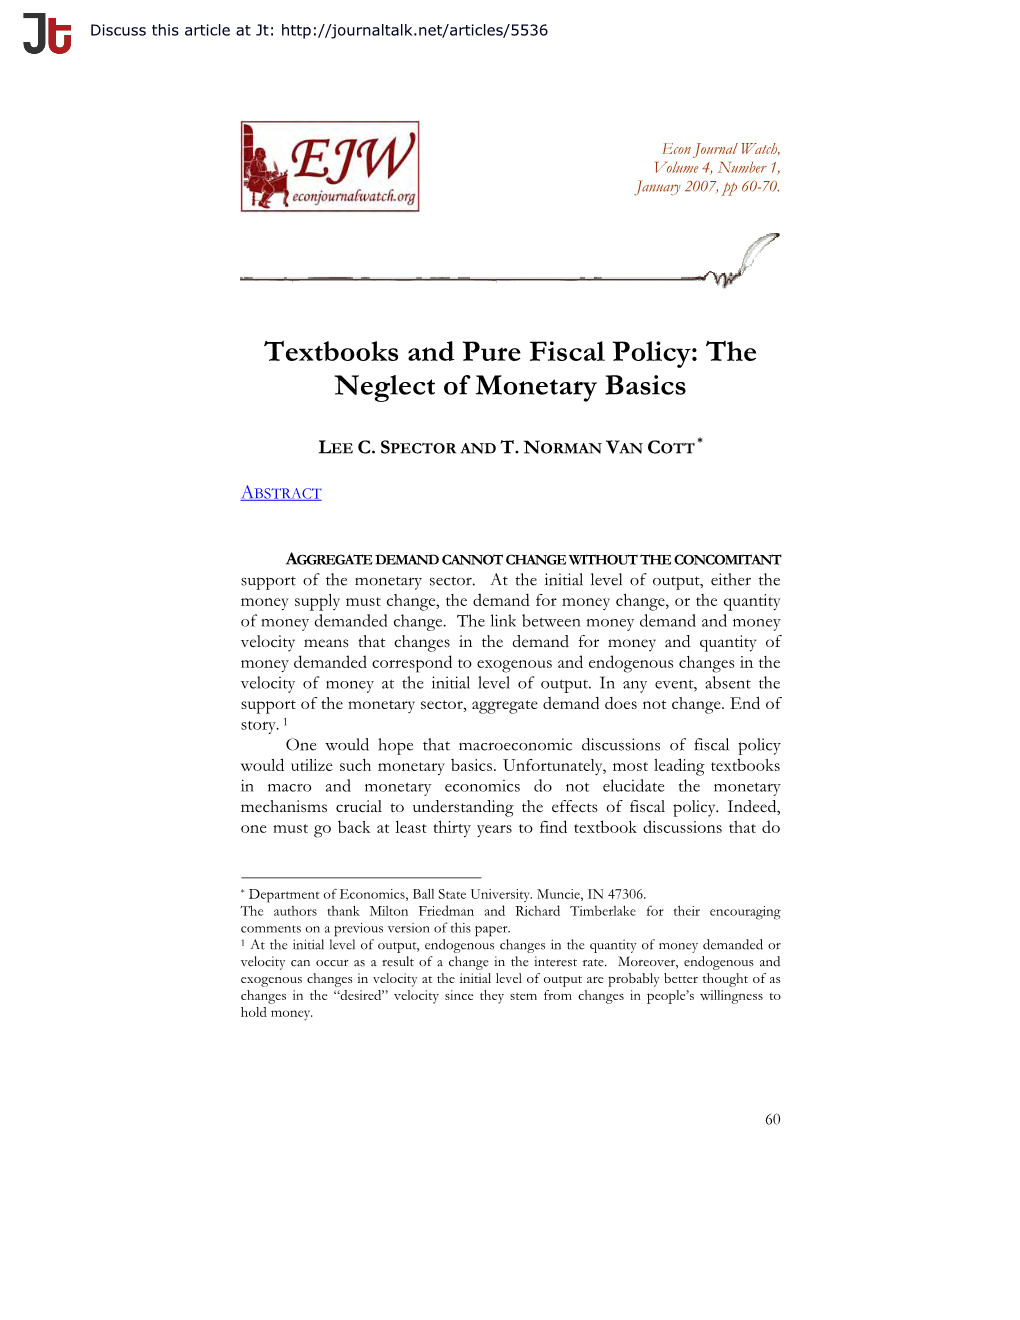 Textbooks and Pure Fiscal Policy: the Neglect of Monetary Basics